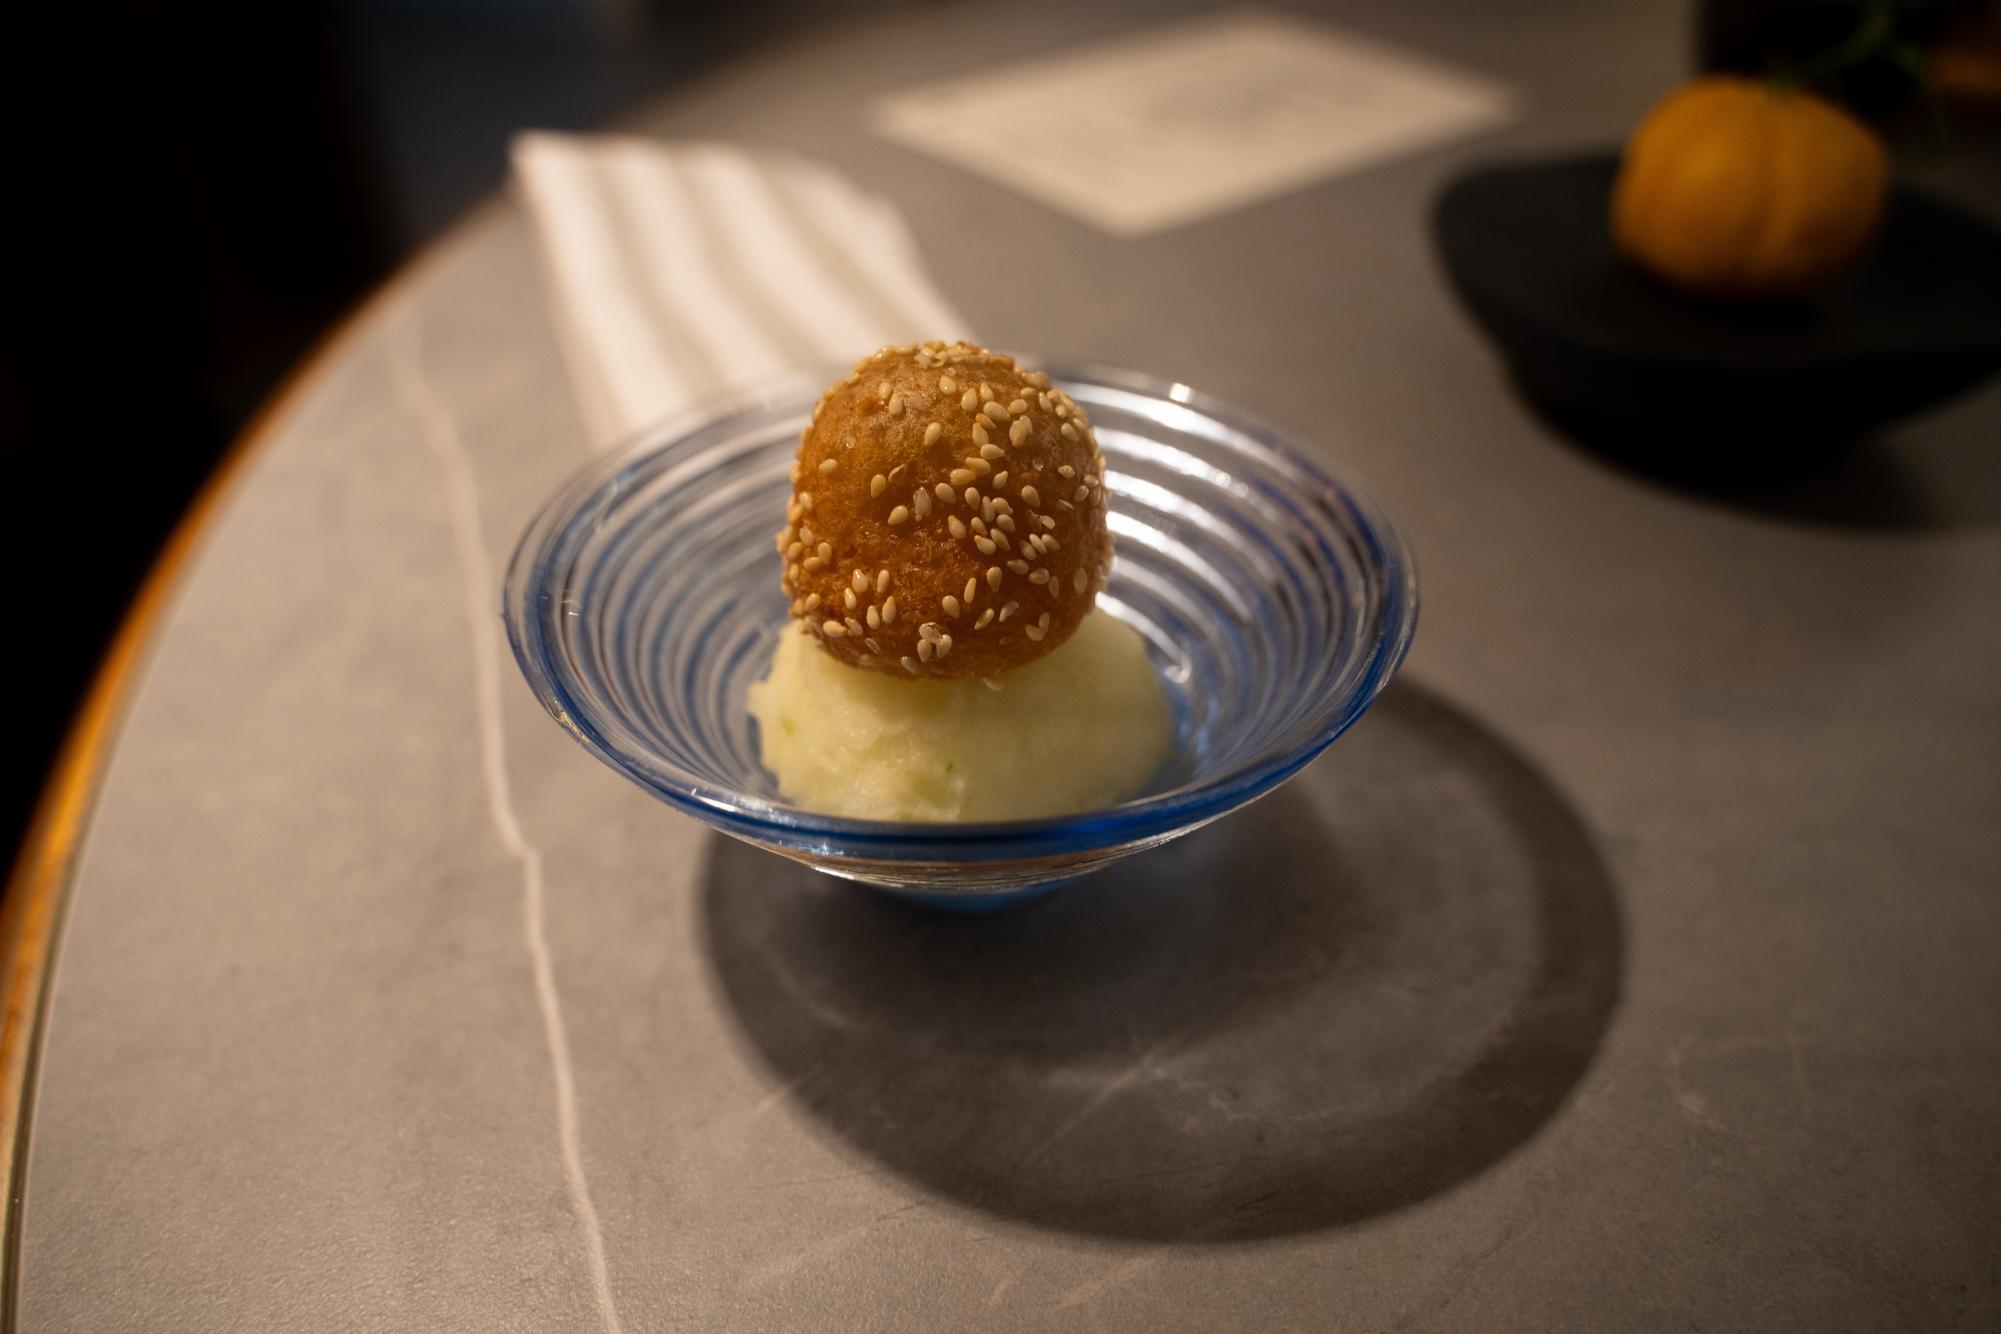 Small blue dish with a sesame ball on top of apple sorbet.